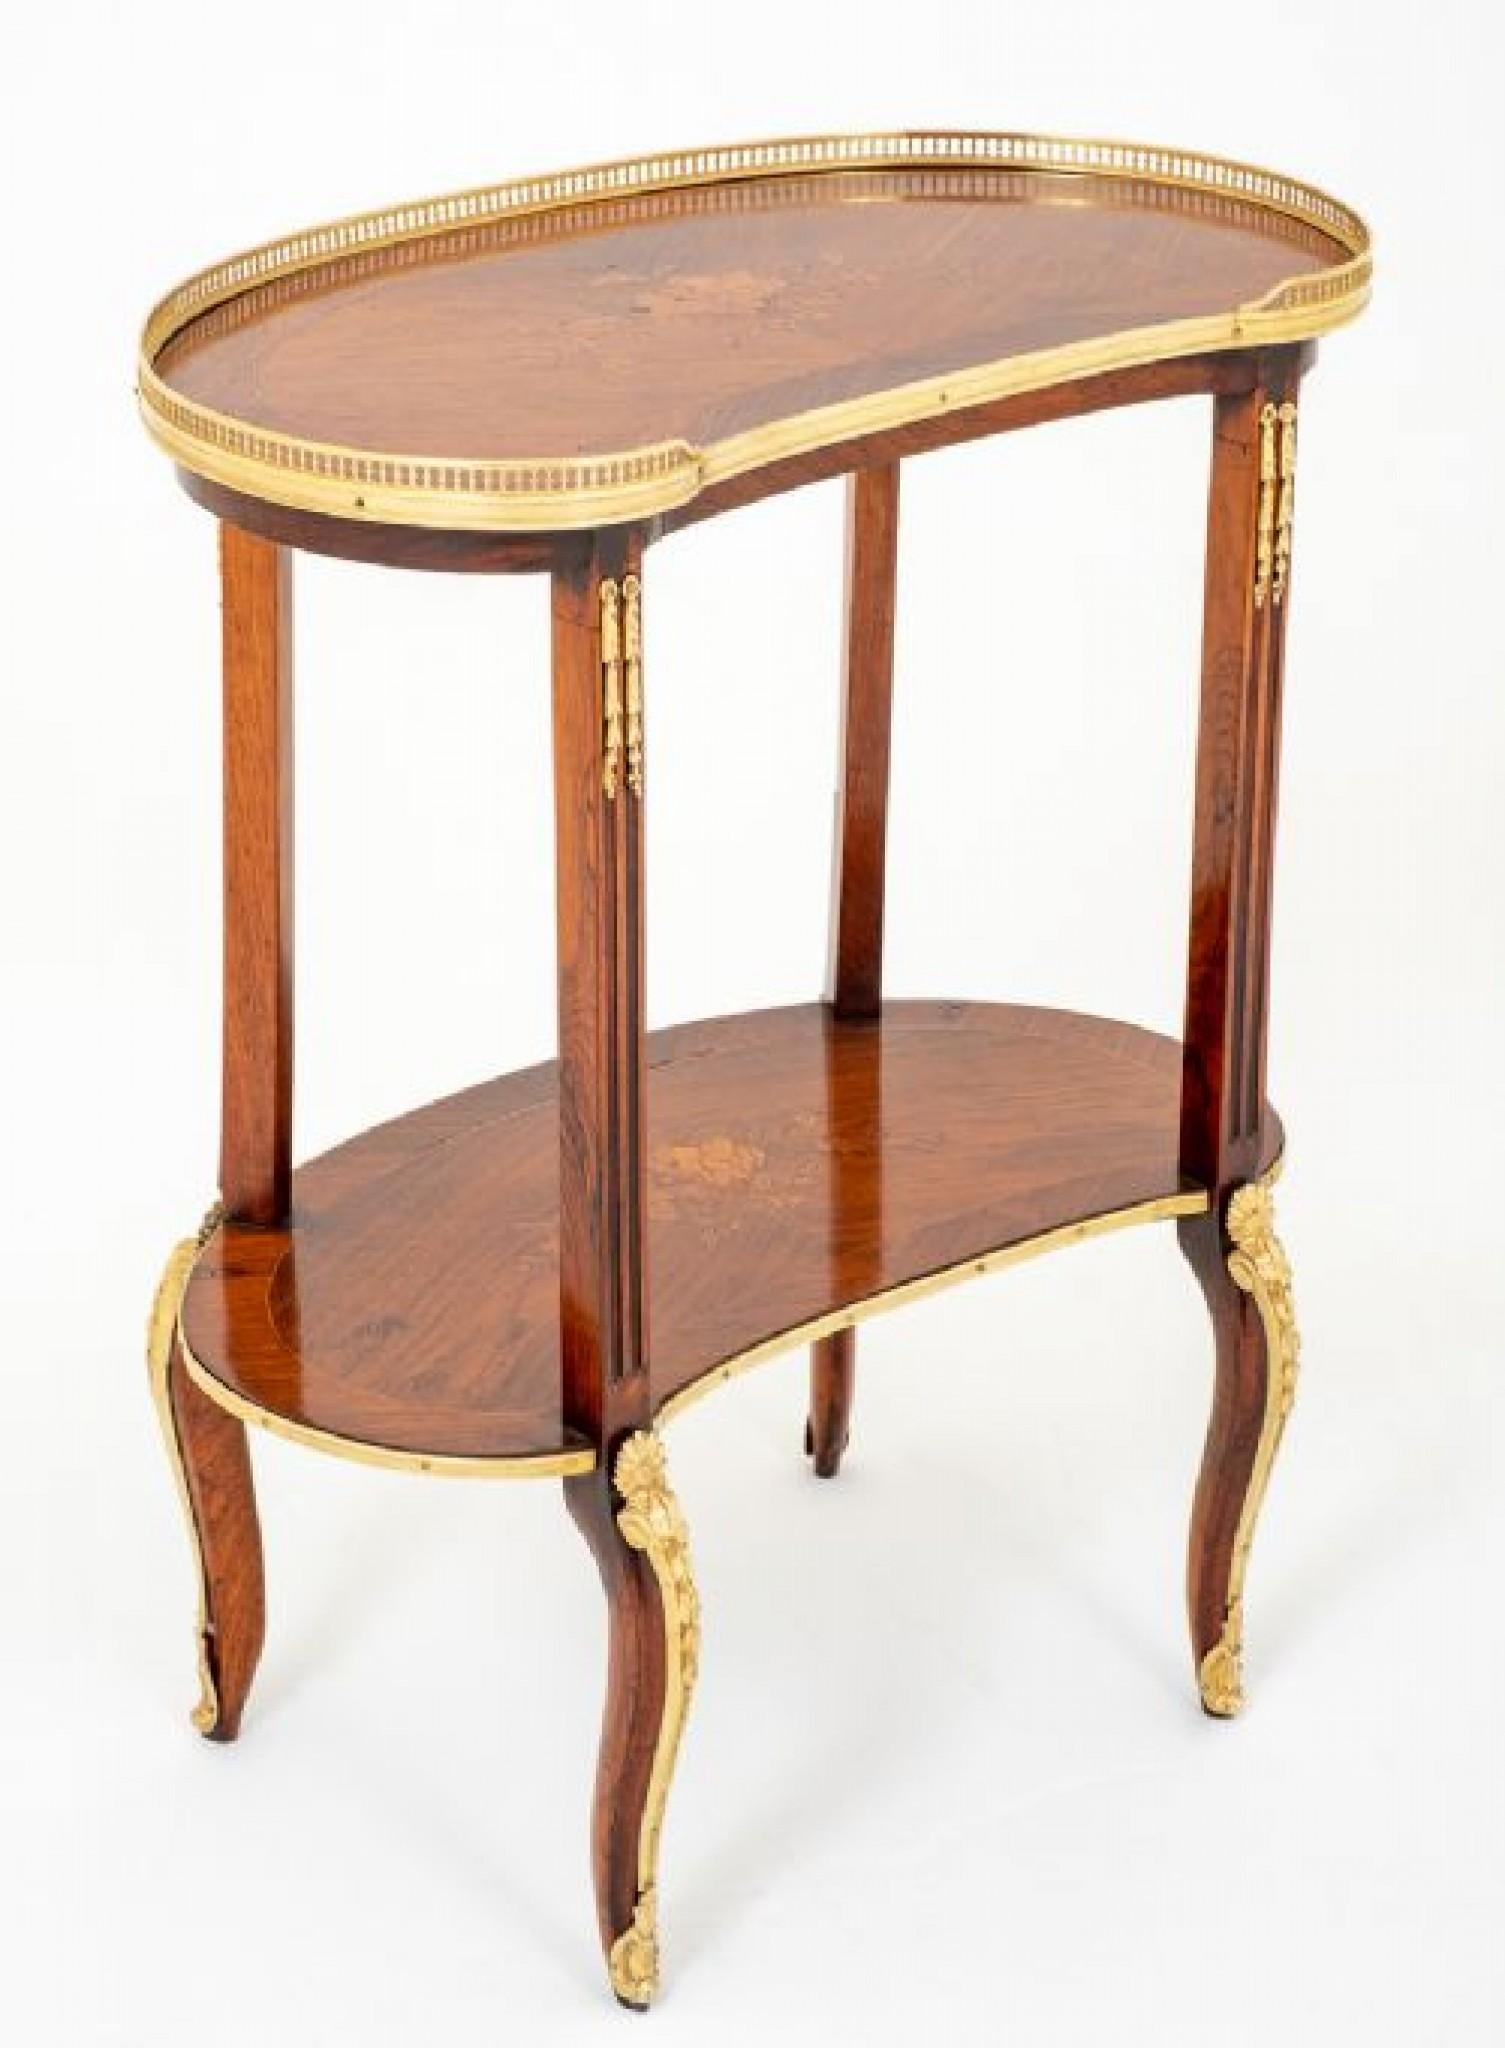 19th Century French Empire Side Table Kidney Bean Form